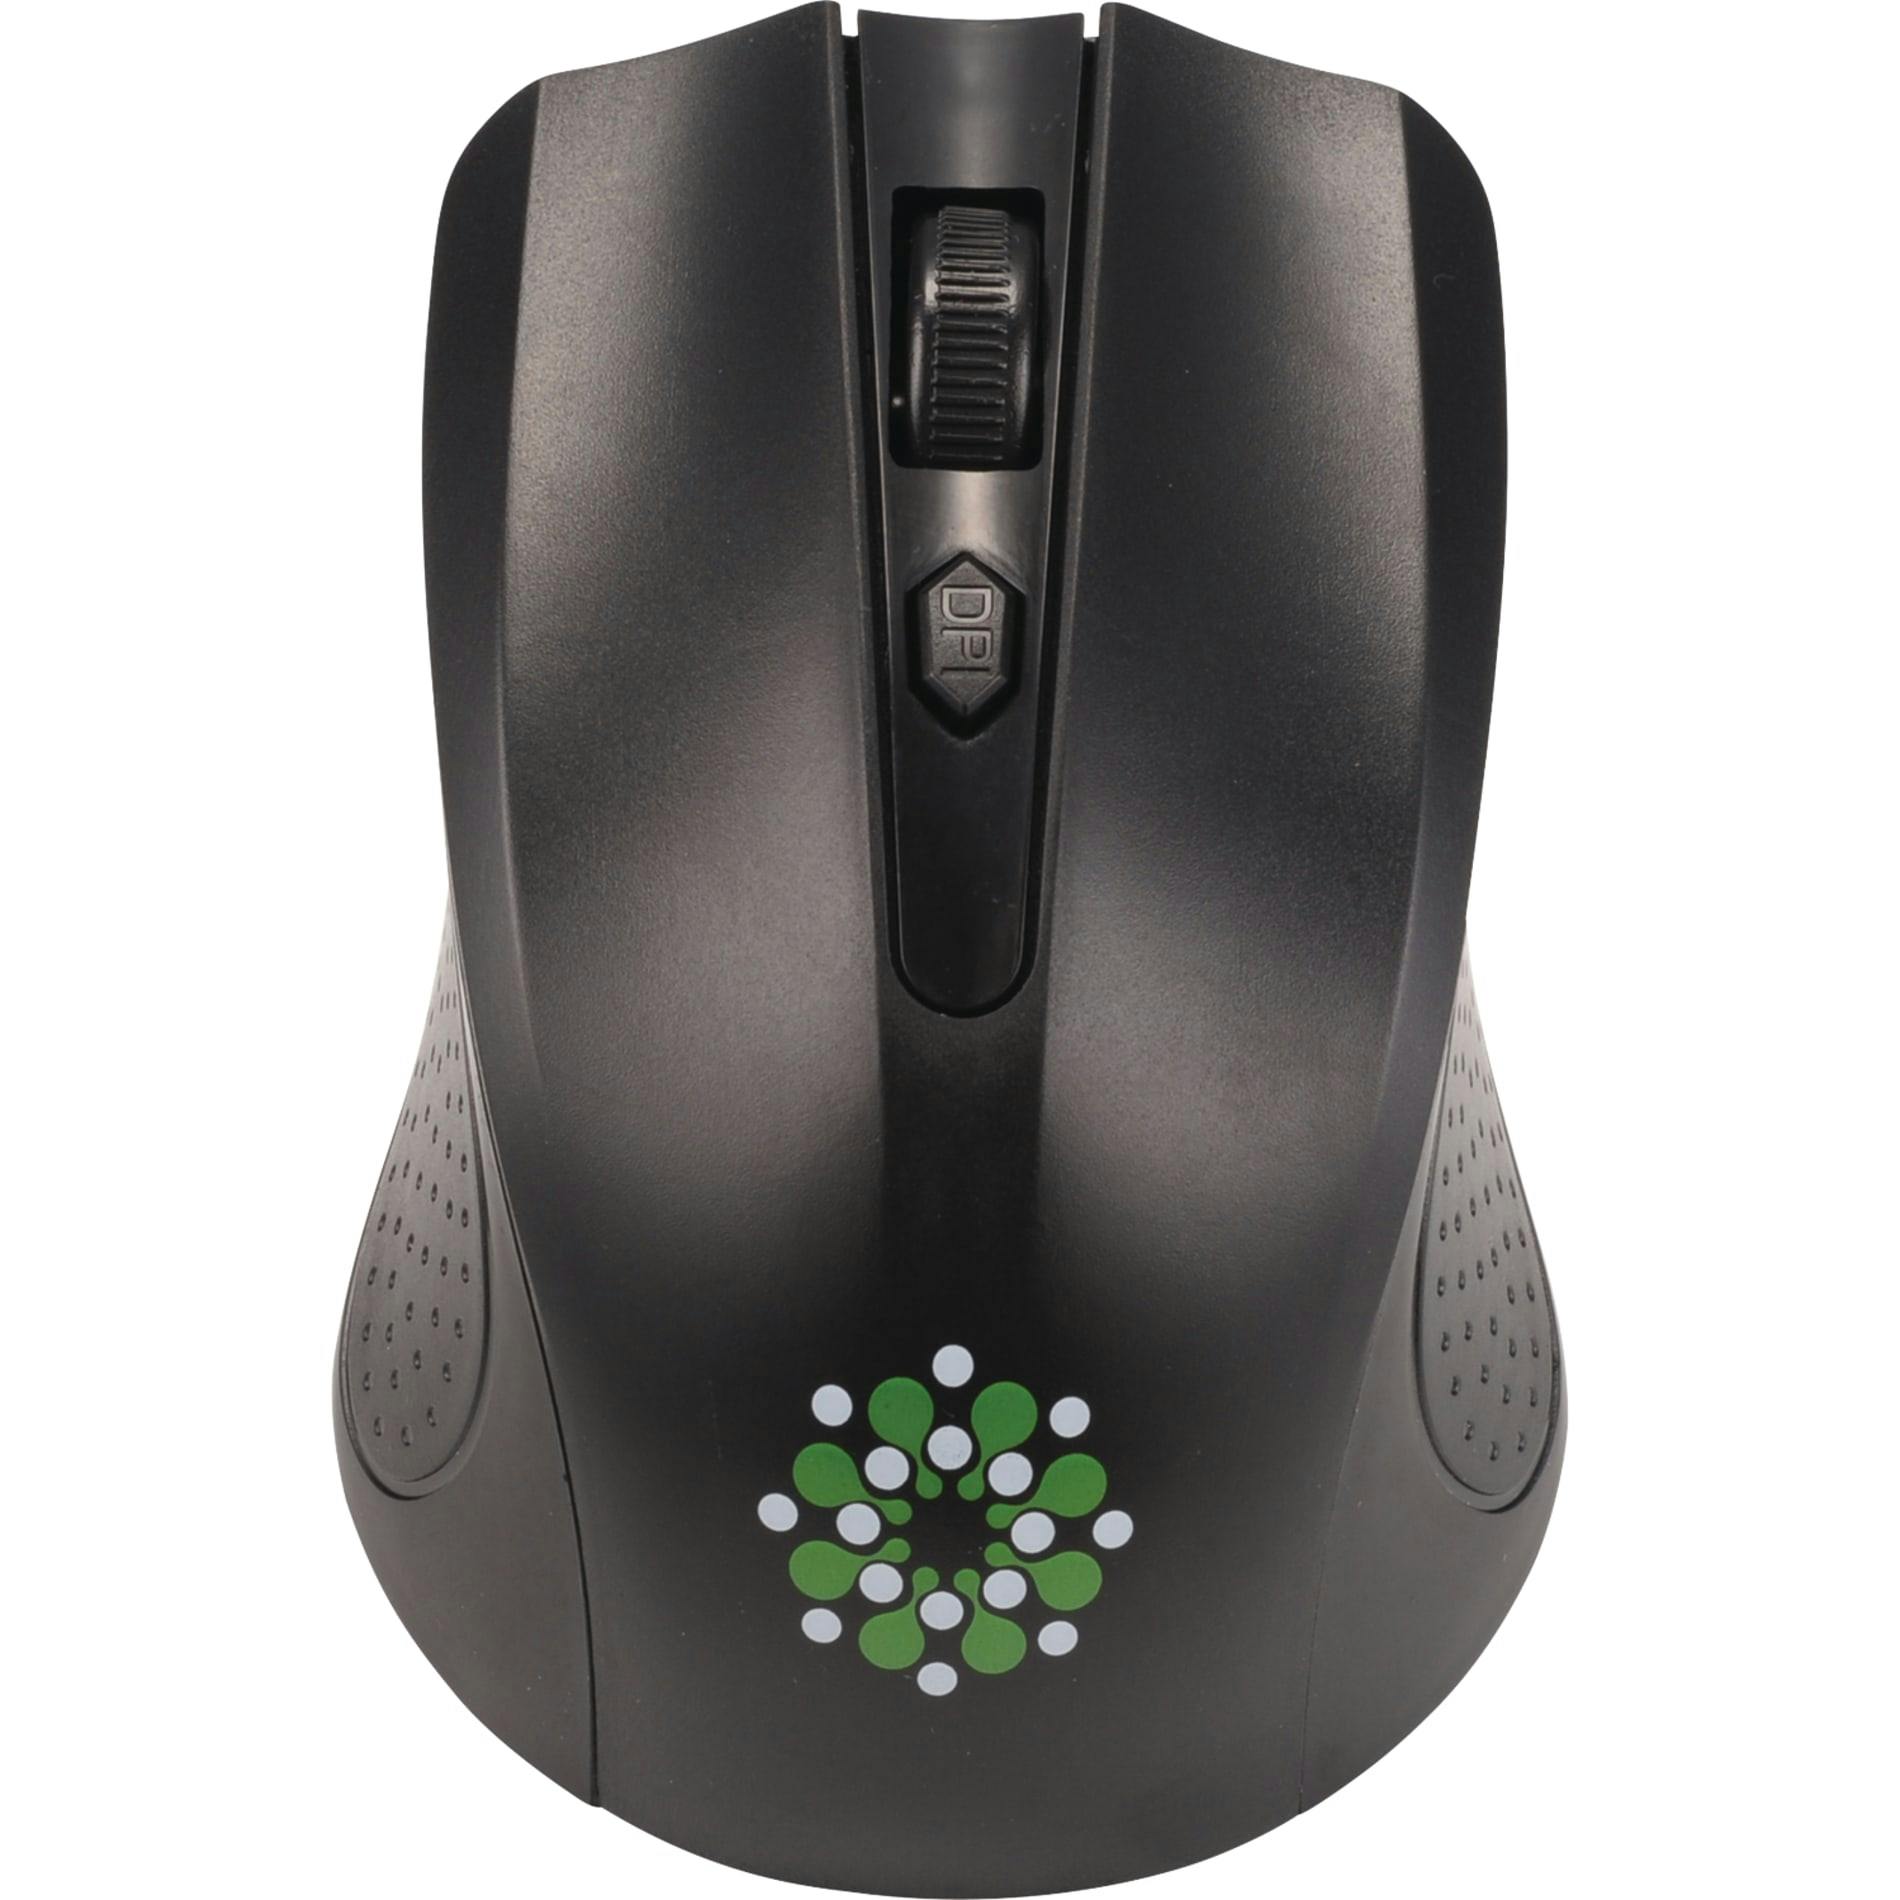 Galactic Wireless Mouse - additional Image 1